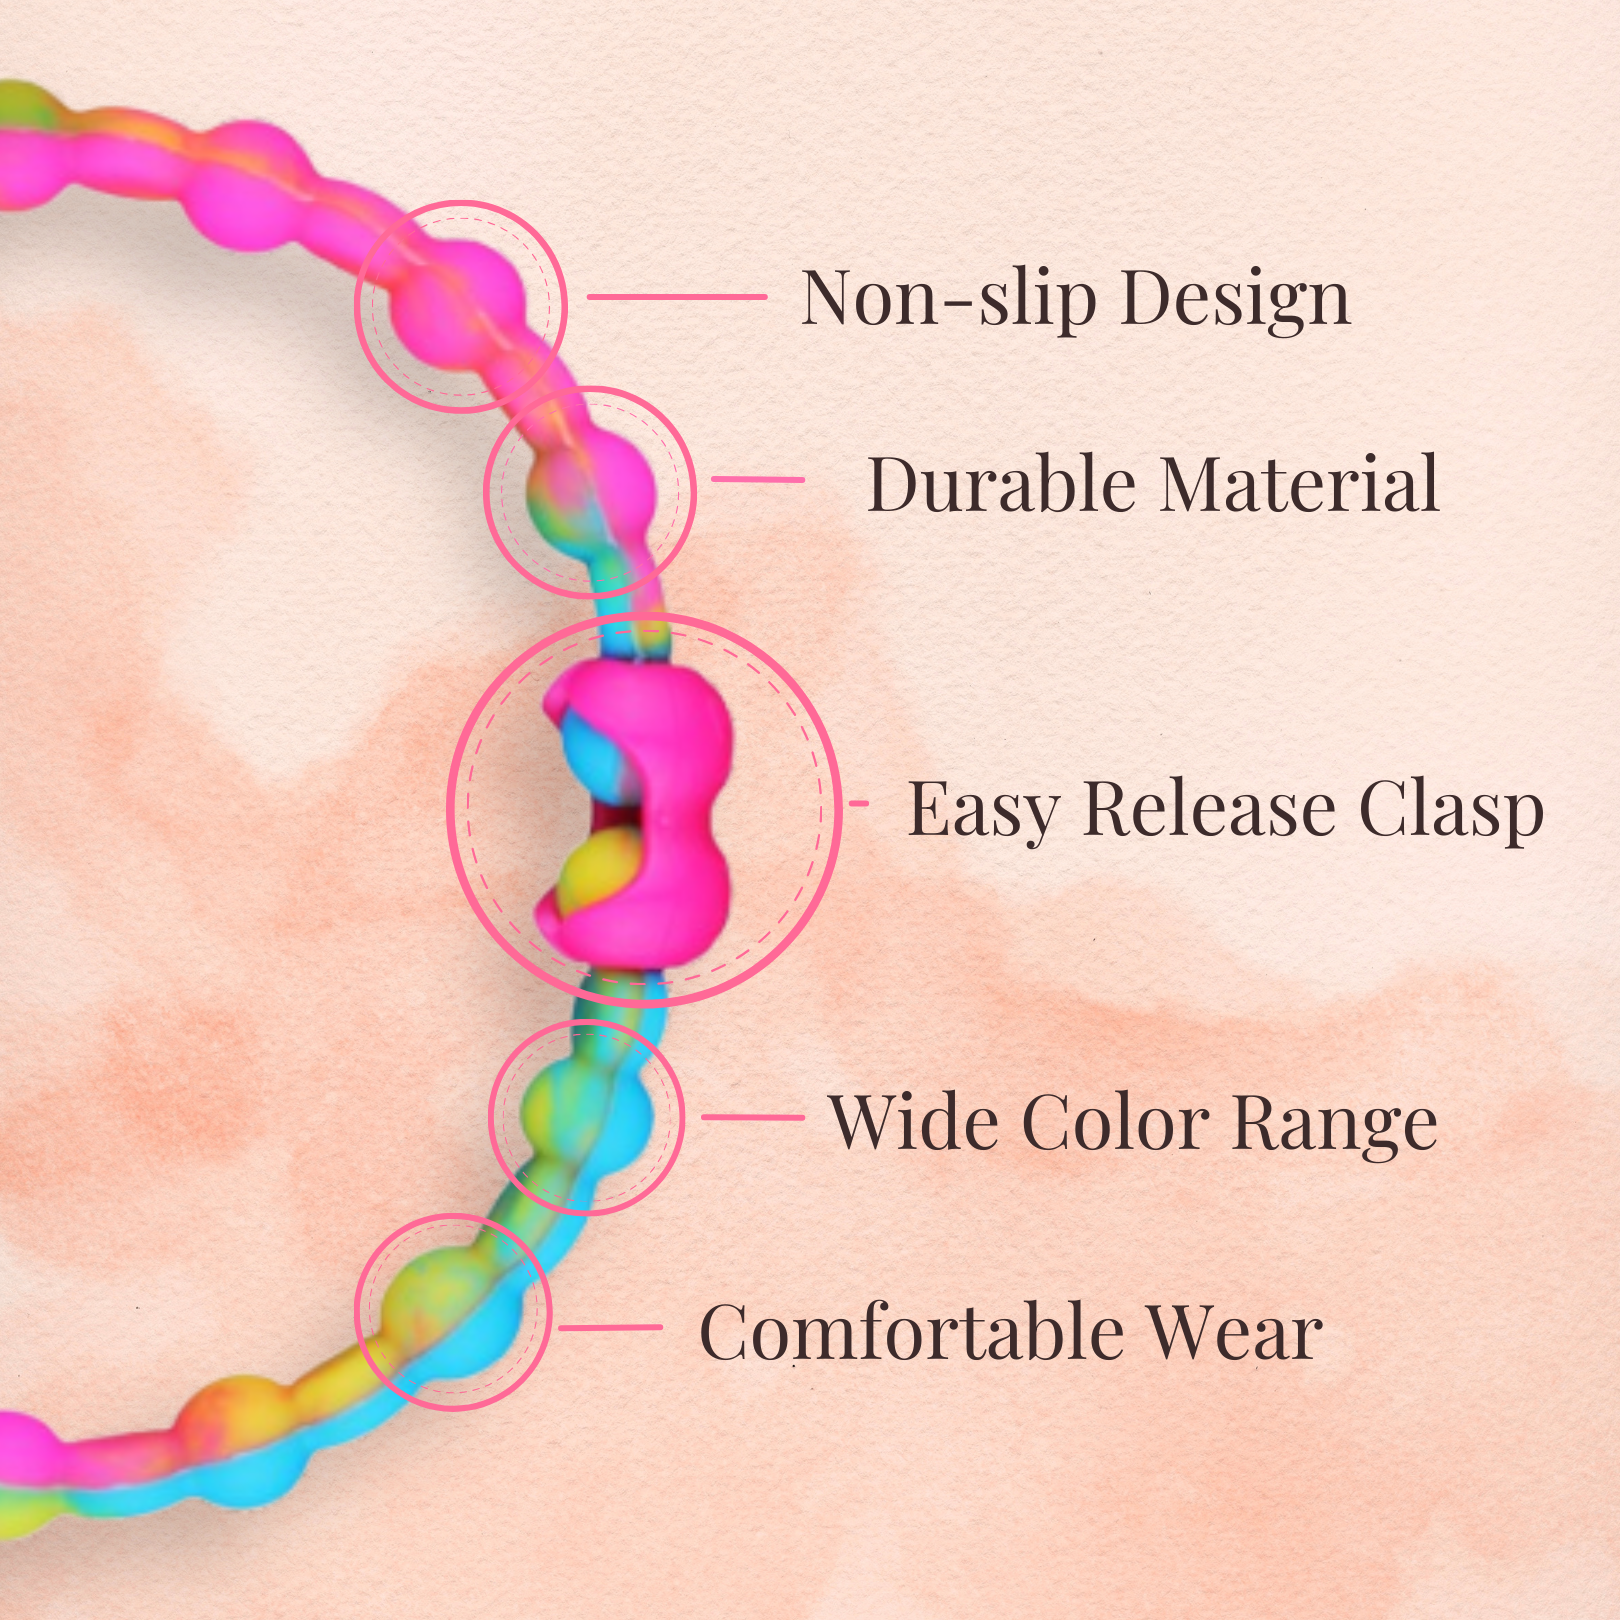 Arctic Whisper Pack PRO Hair Ties: Easy Release Adjustable for Every Hair Type PACK OF 8